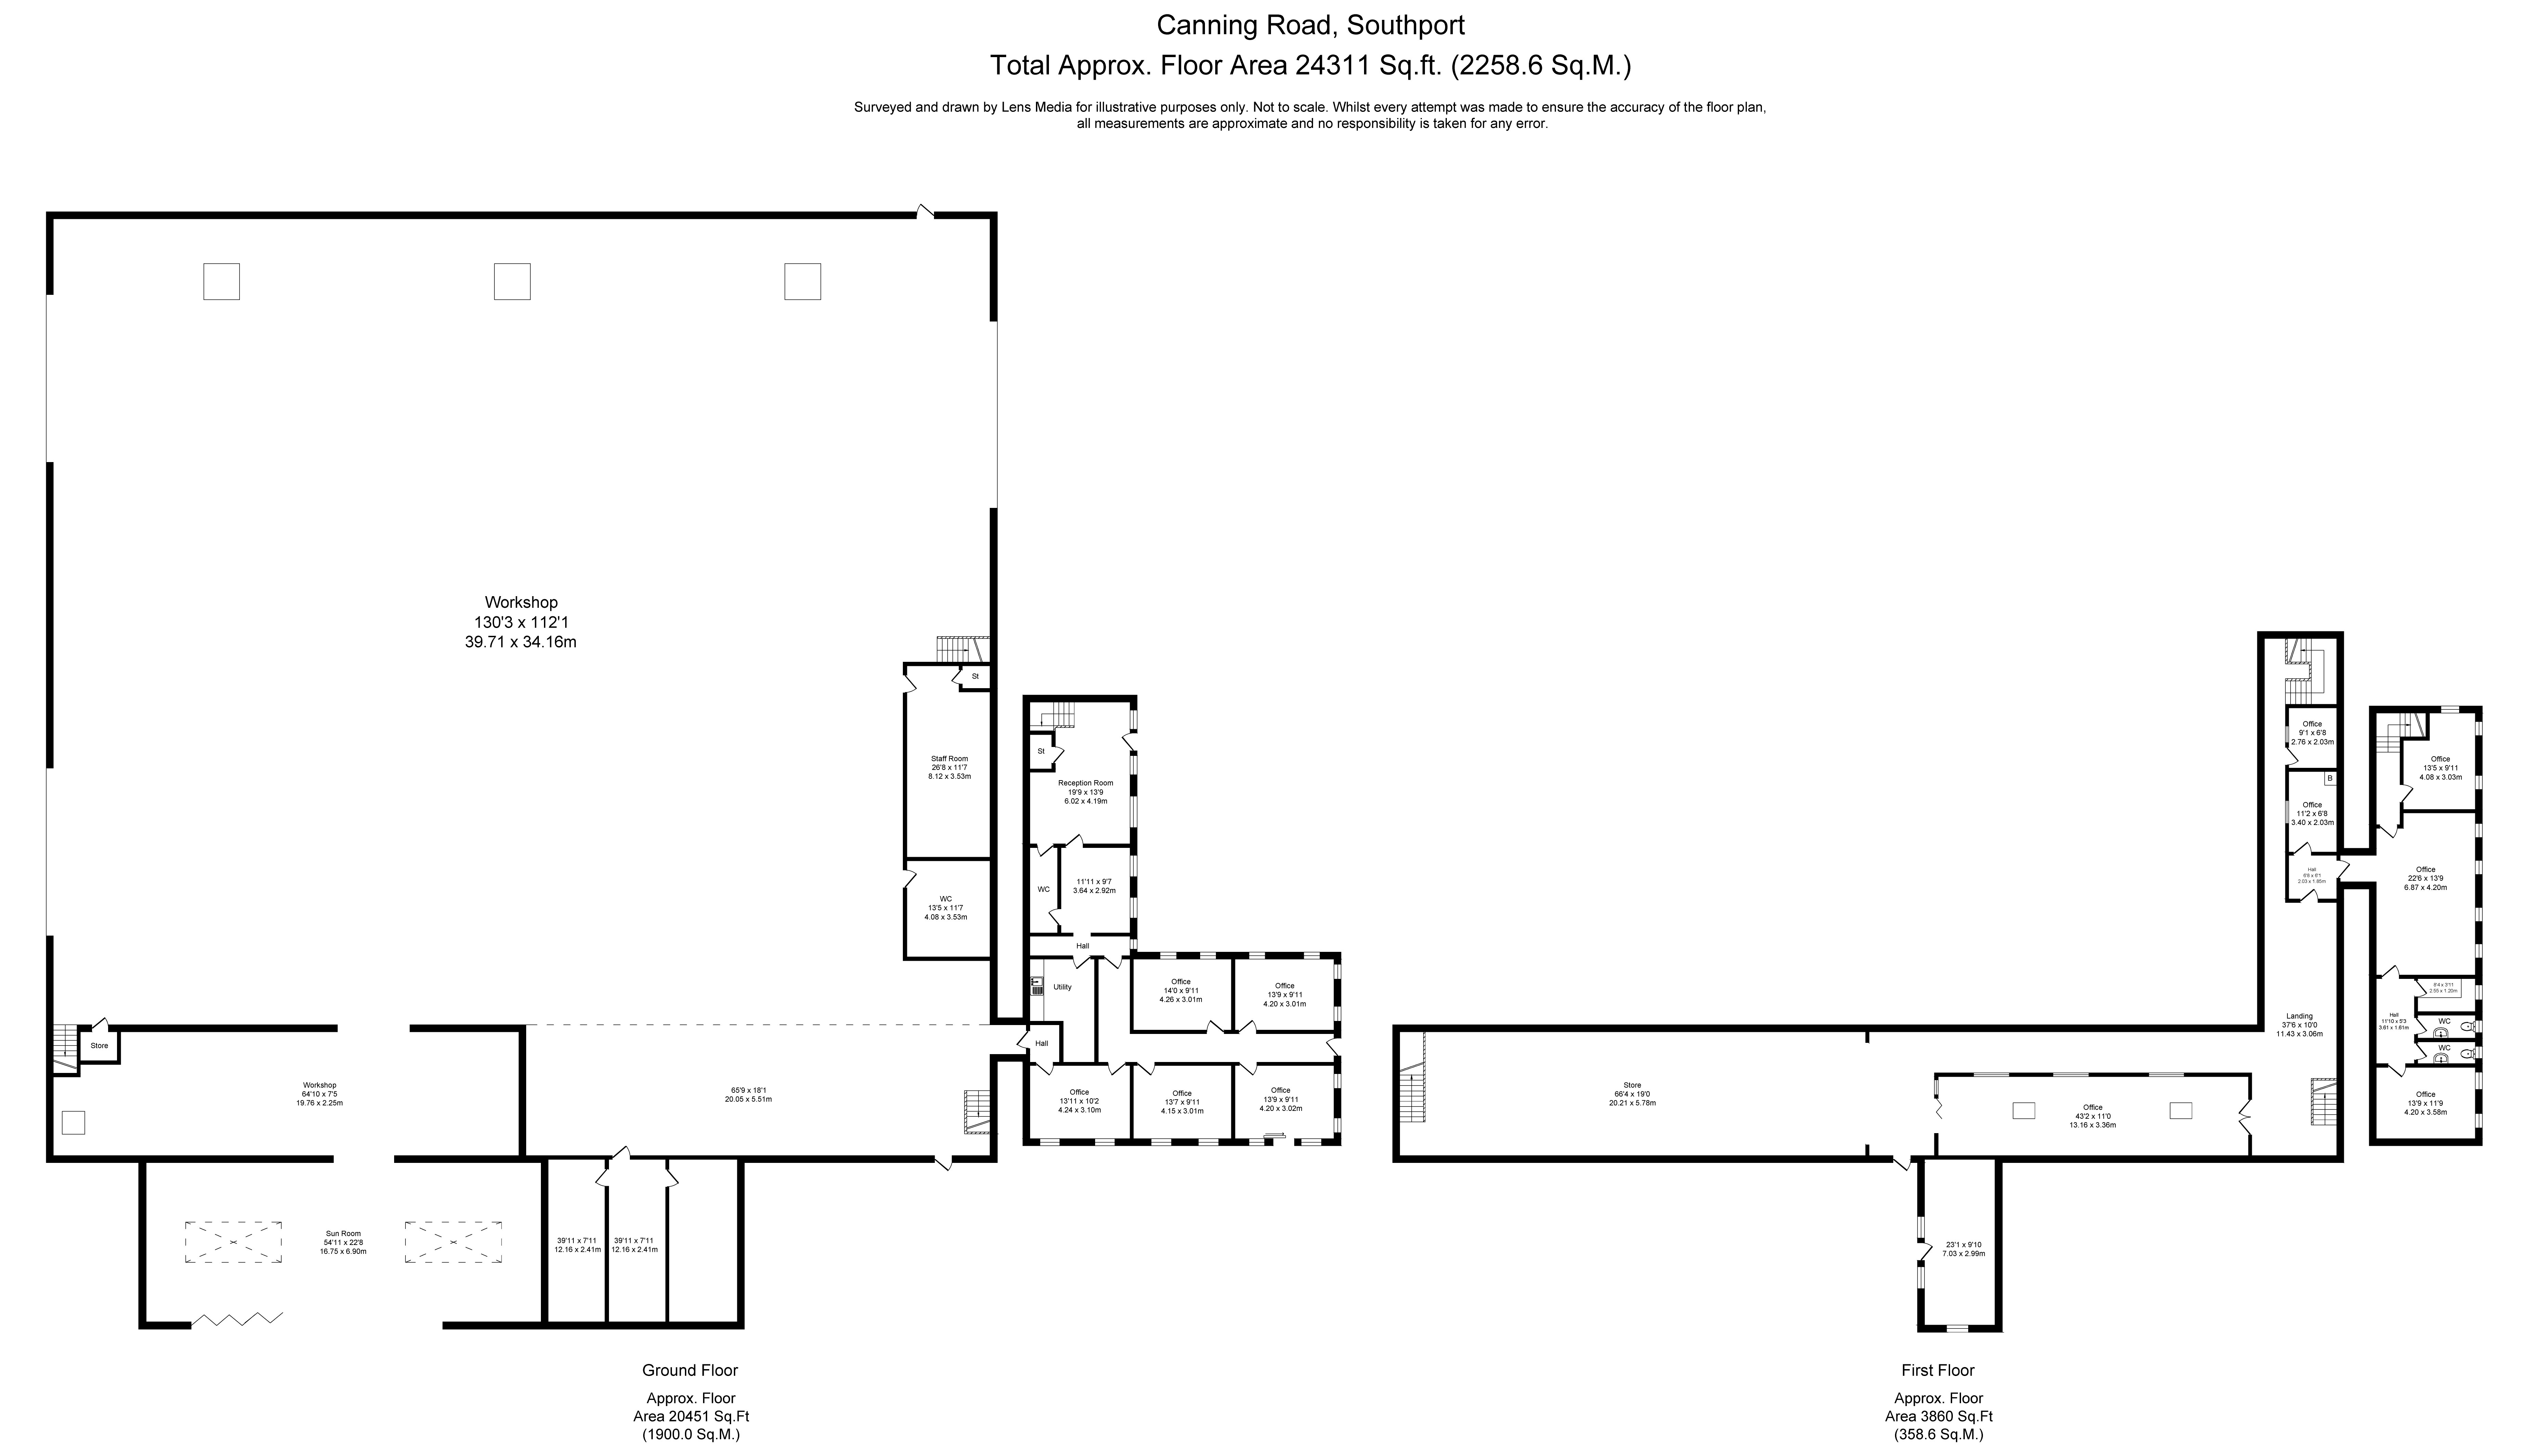 Floorplans For Canning Road, Southport